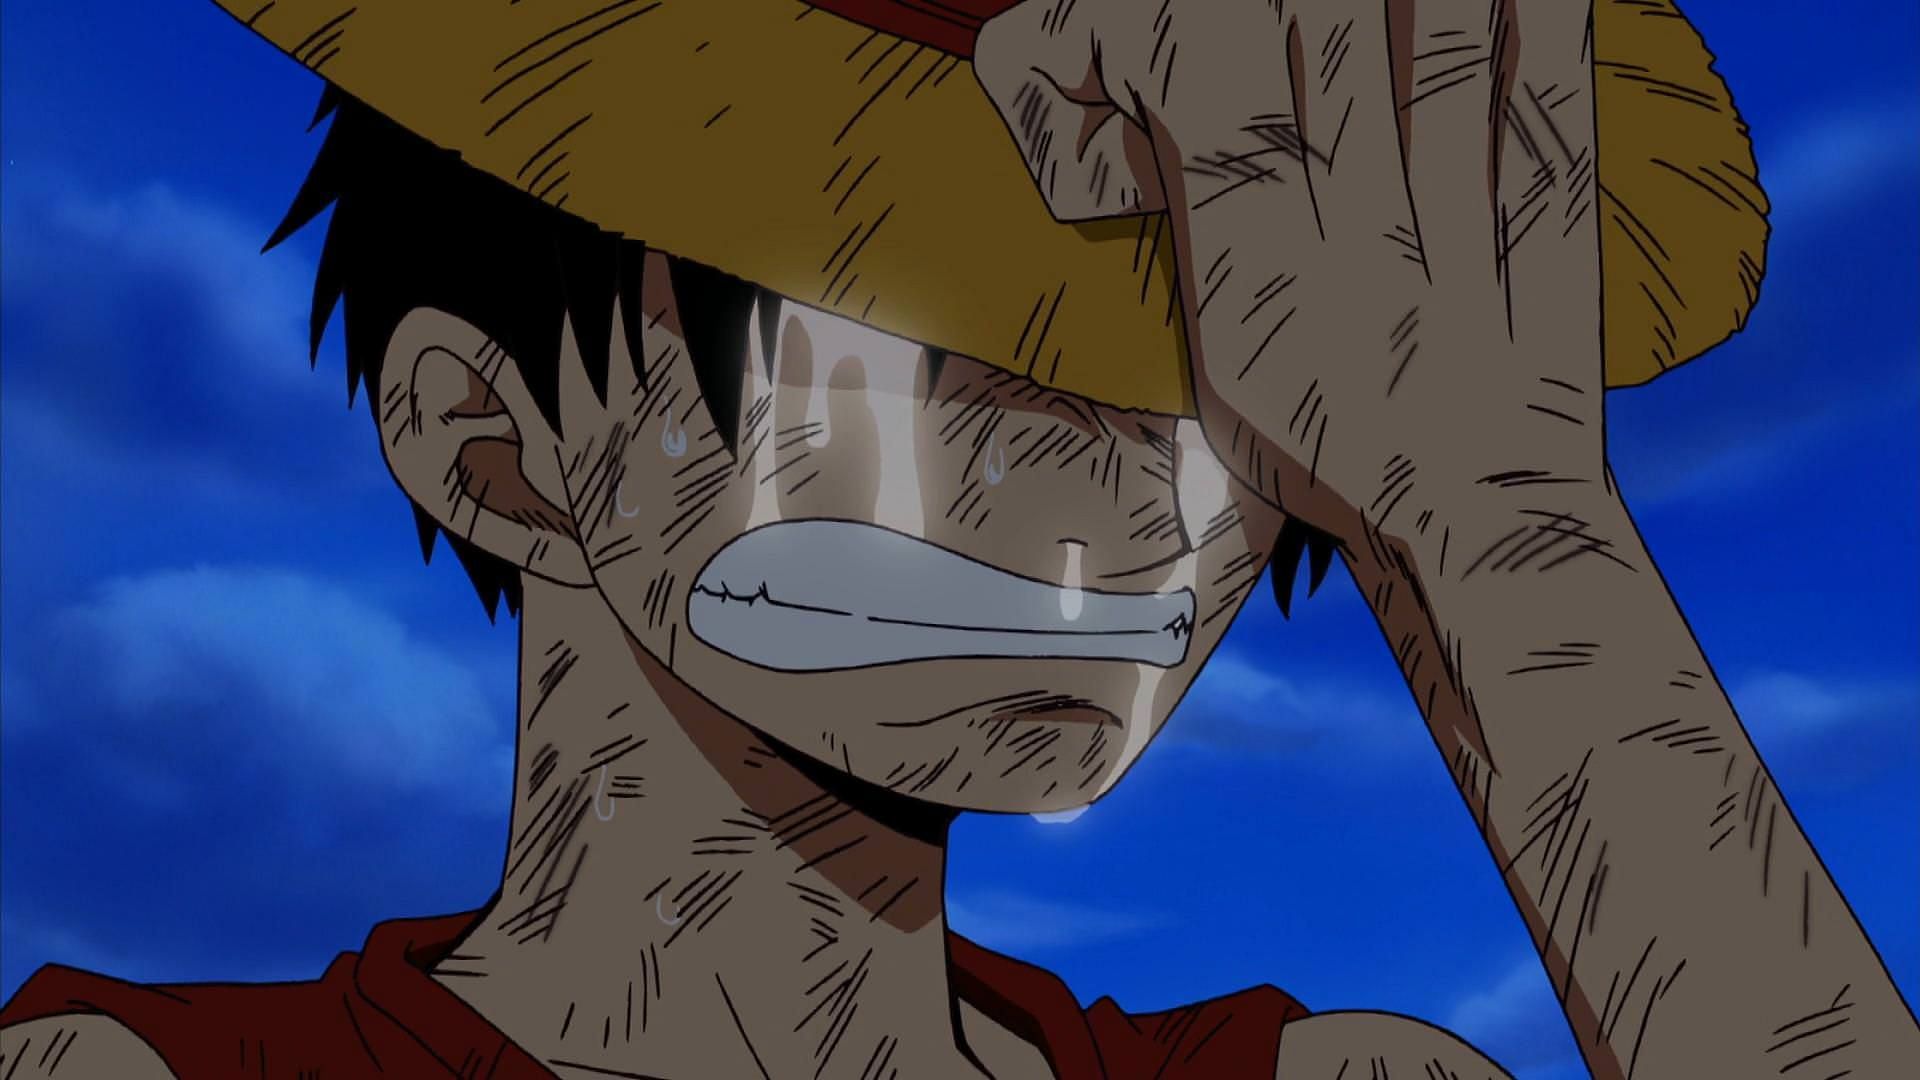 Same Day Release For One Piece Chapter 1044 And Episode 1015 Ruined By Toei Animation Server Hack